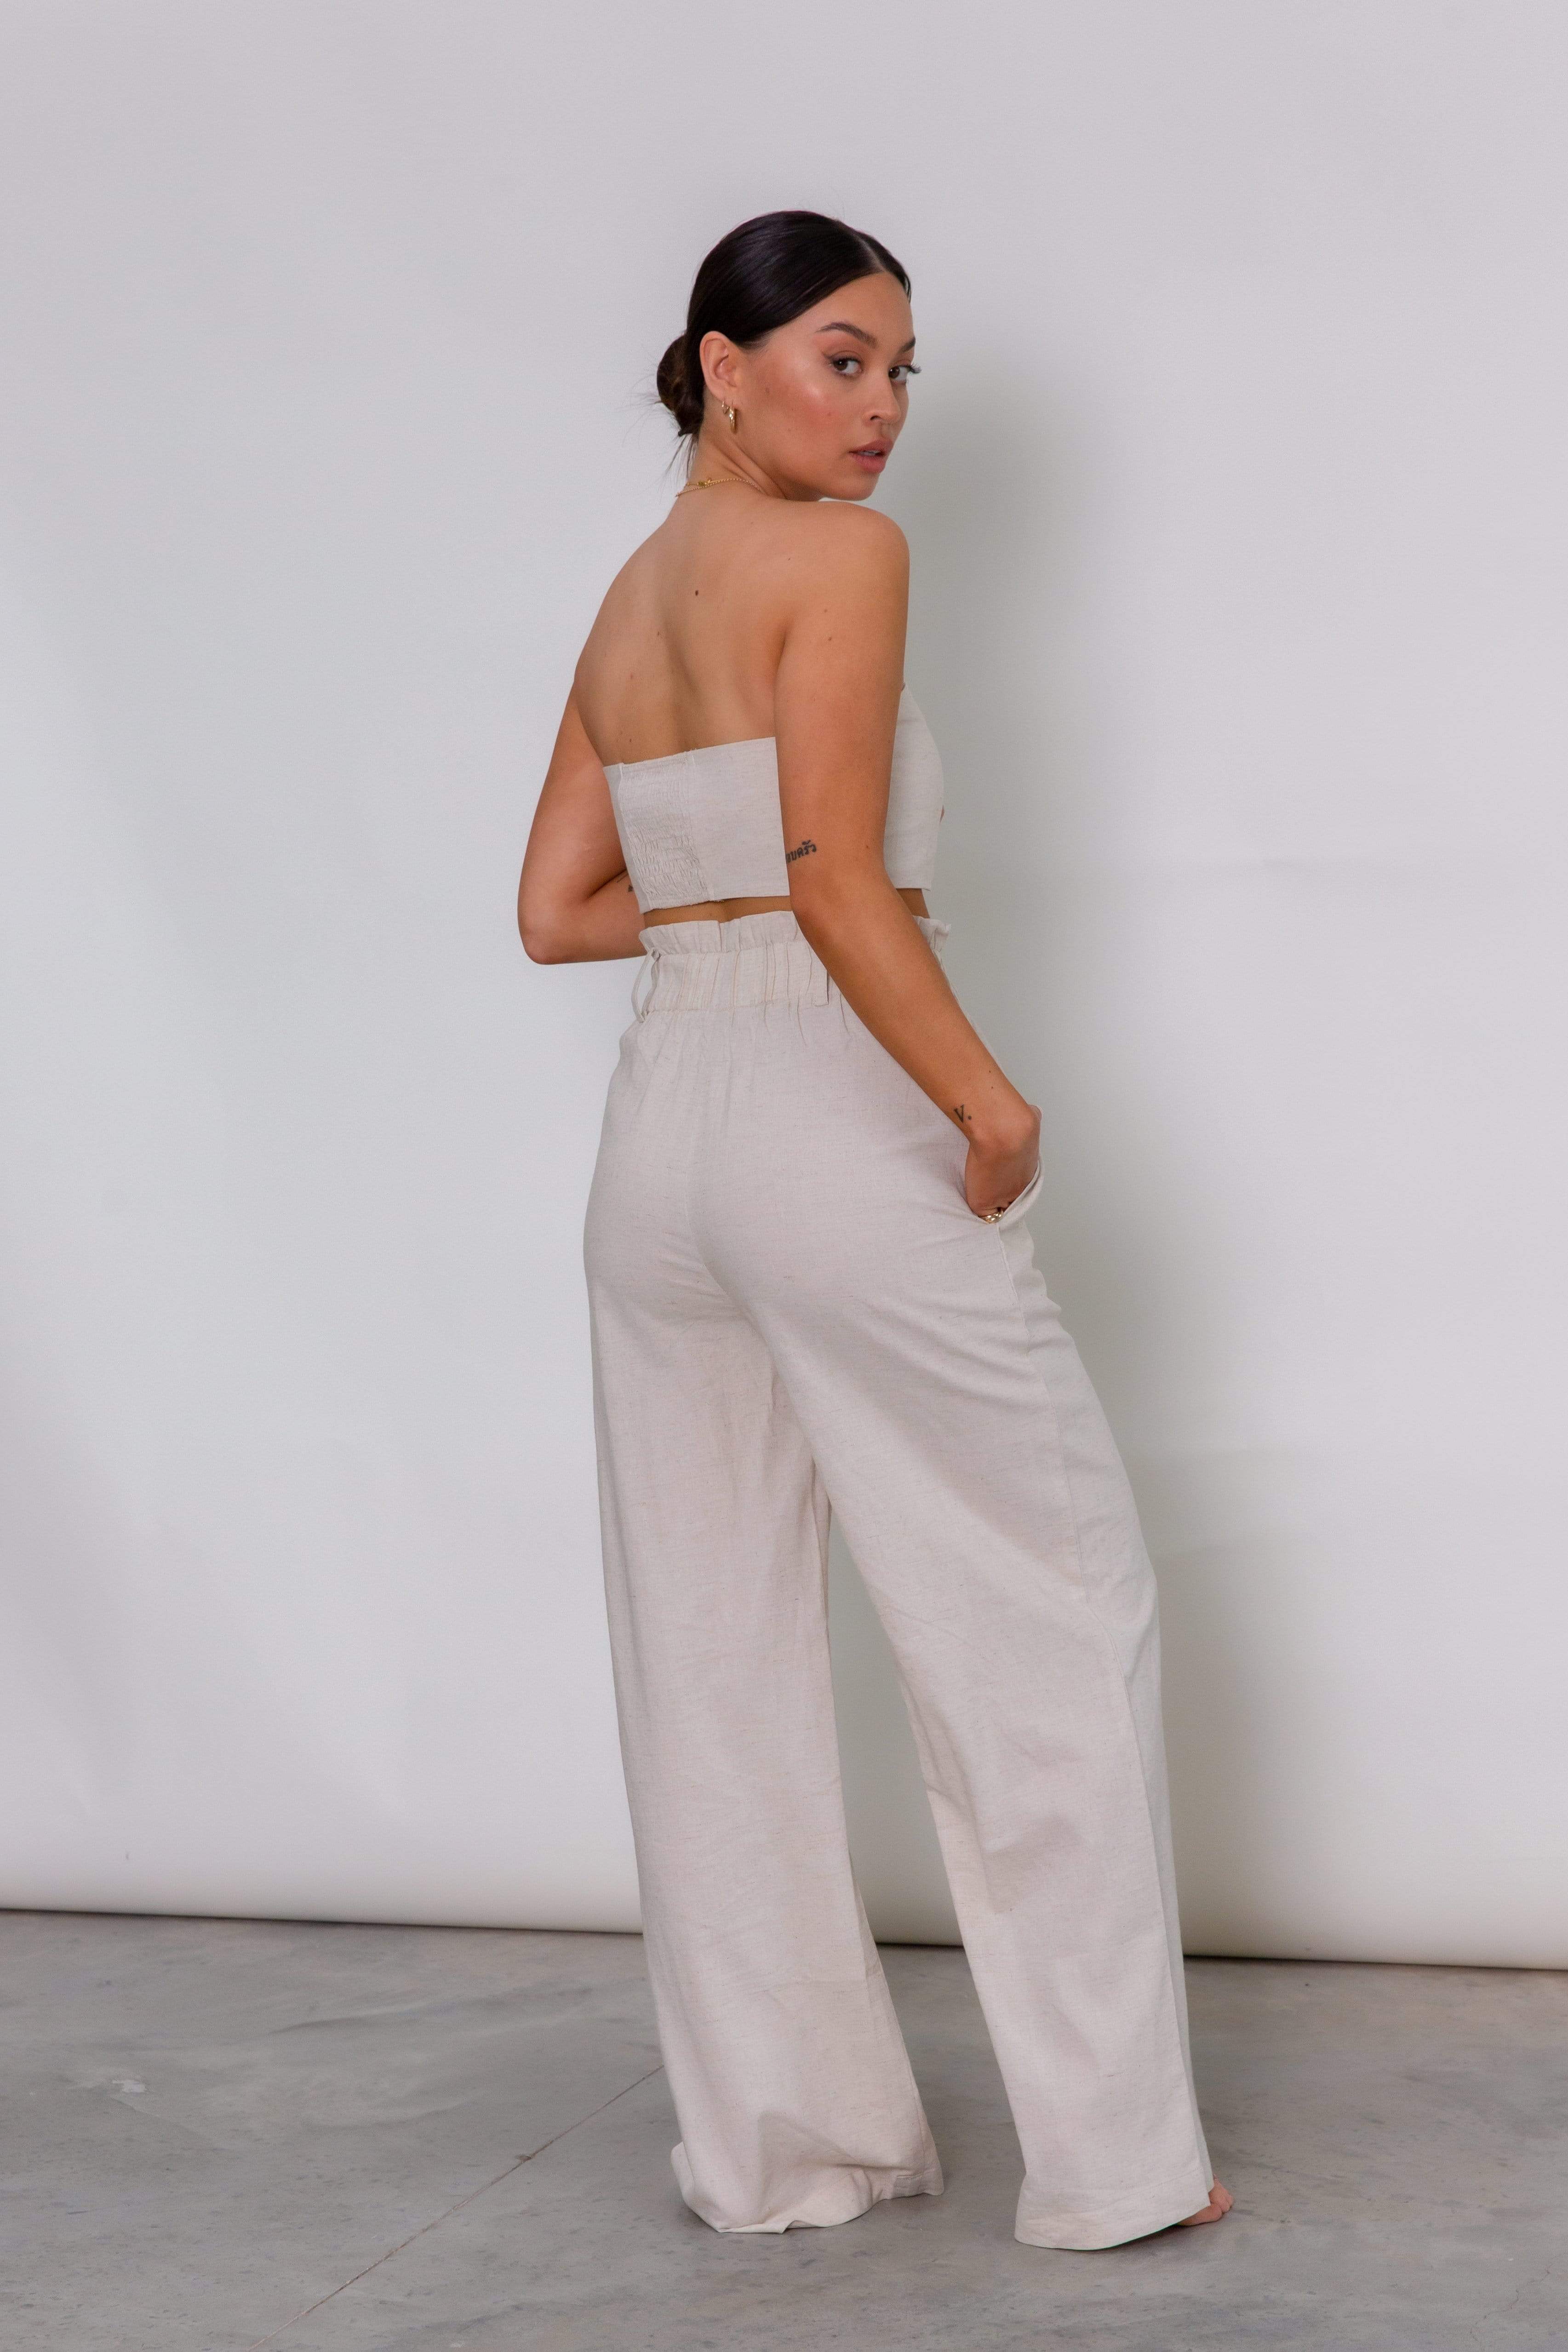 COVER STORY Trousers and Pants  Buy COVER STORY Lilac Paper Bag Trouser  Online  Nykaa Fashion